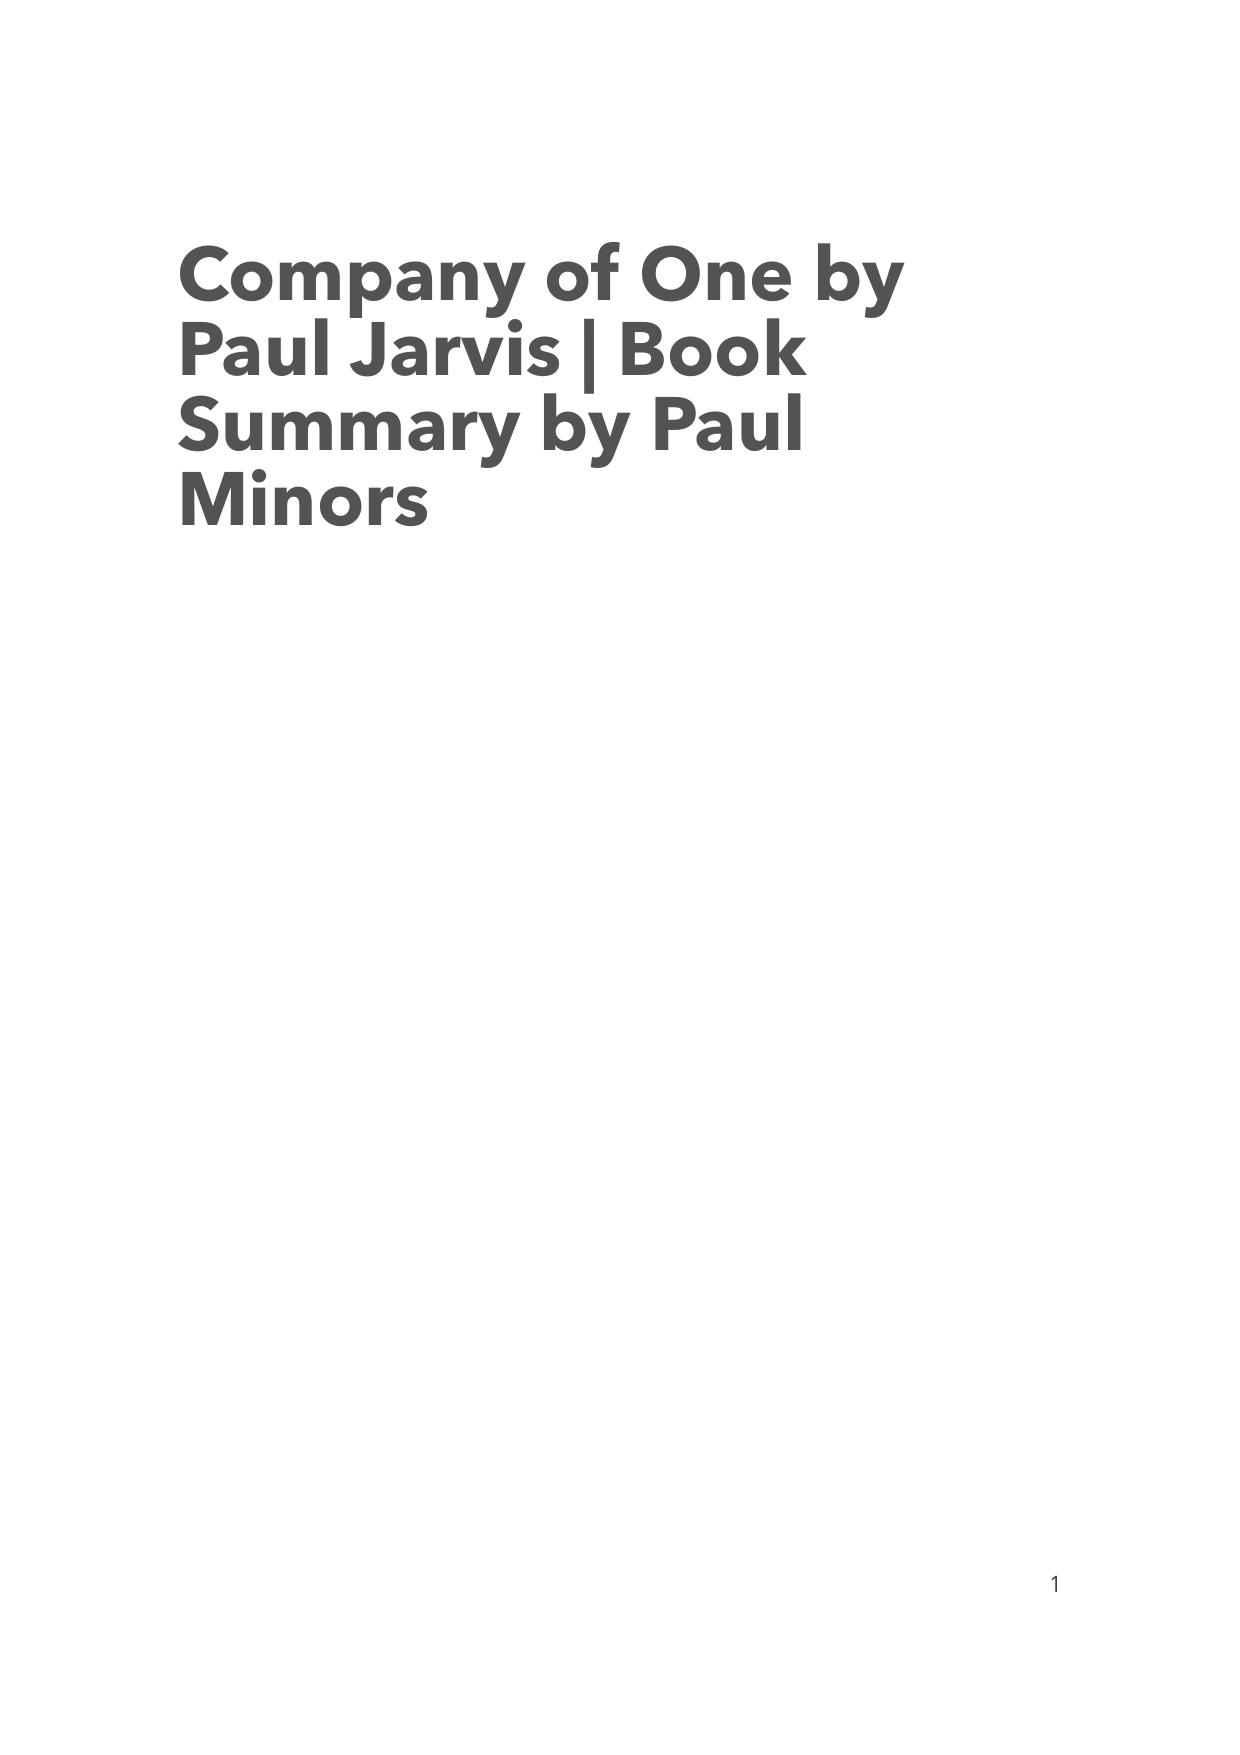 Company of One (Paul Jarvis) Book Summary